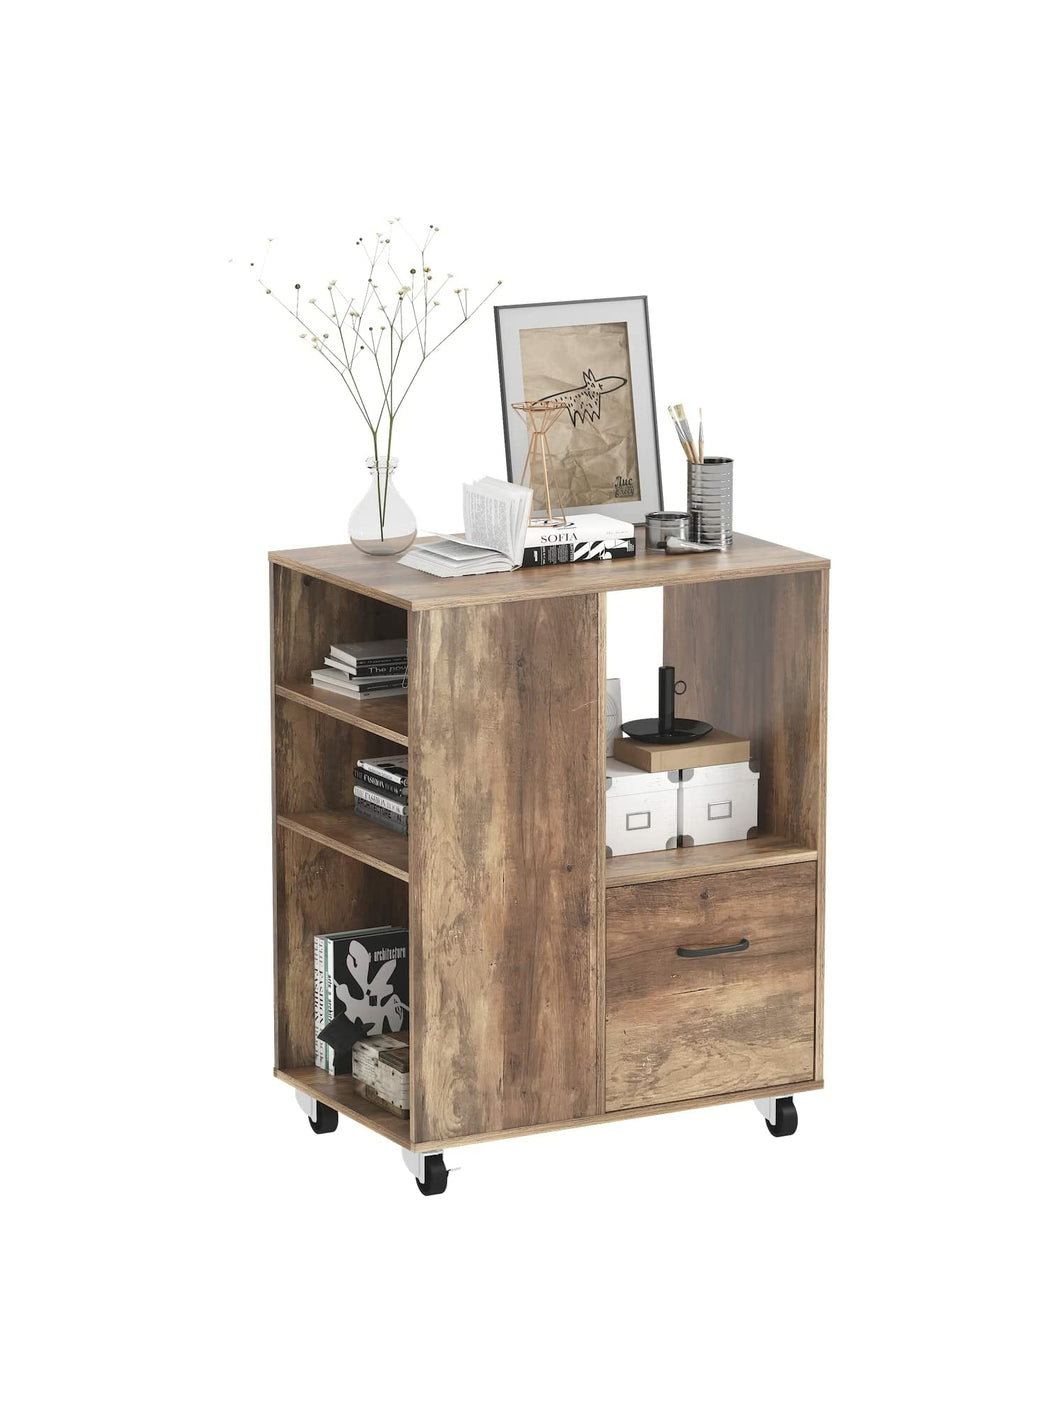 Mobile Wood Office Storage Cabinet With Drawers And Shelves For Home Office